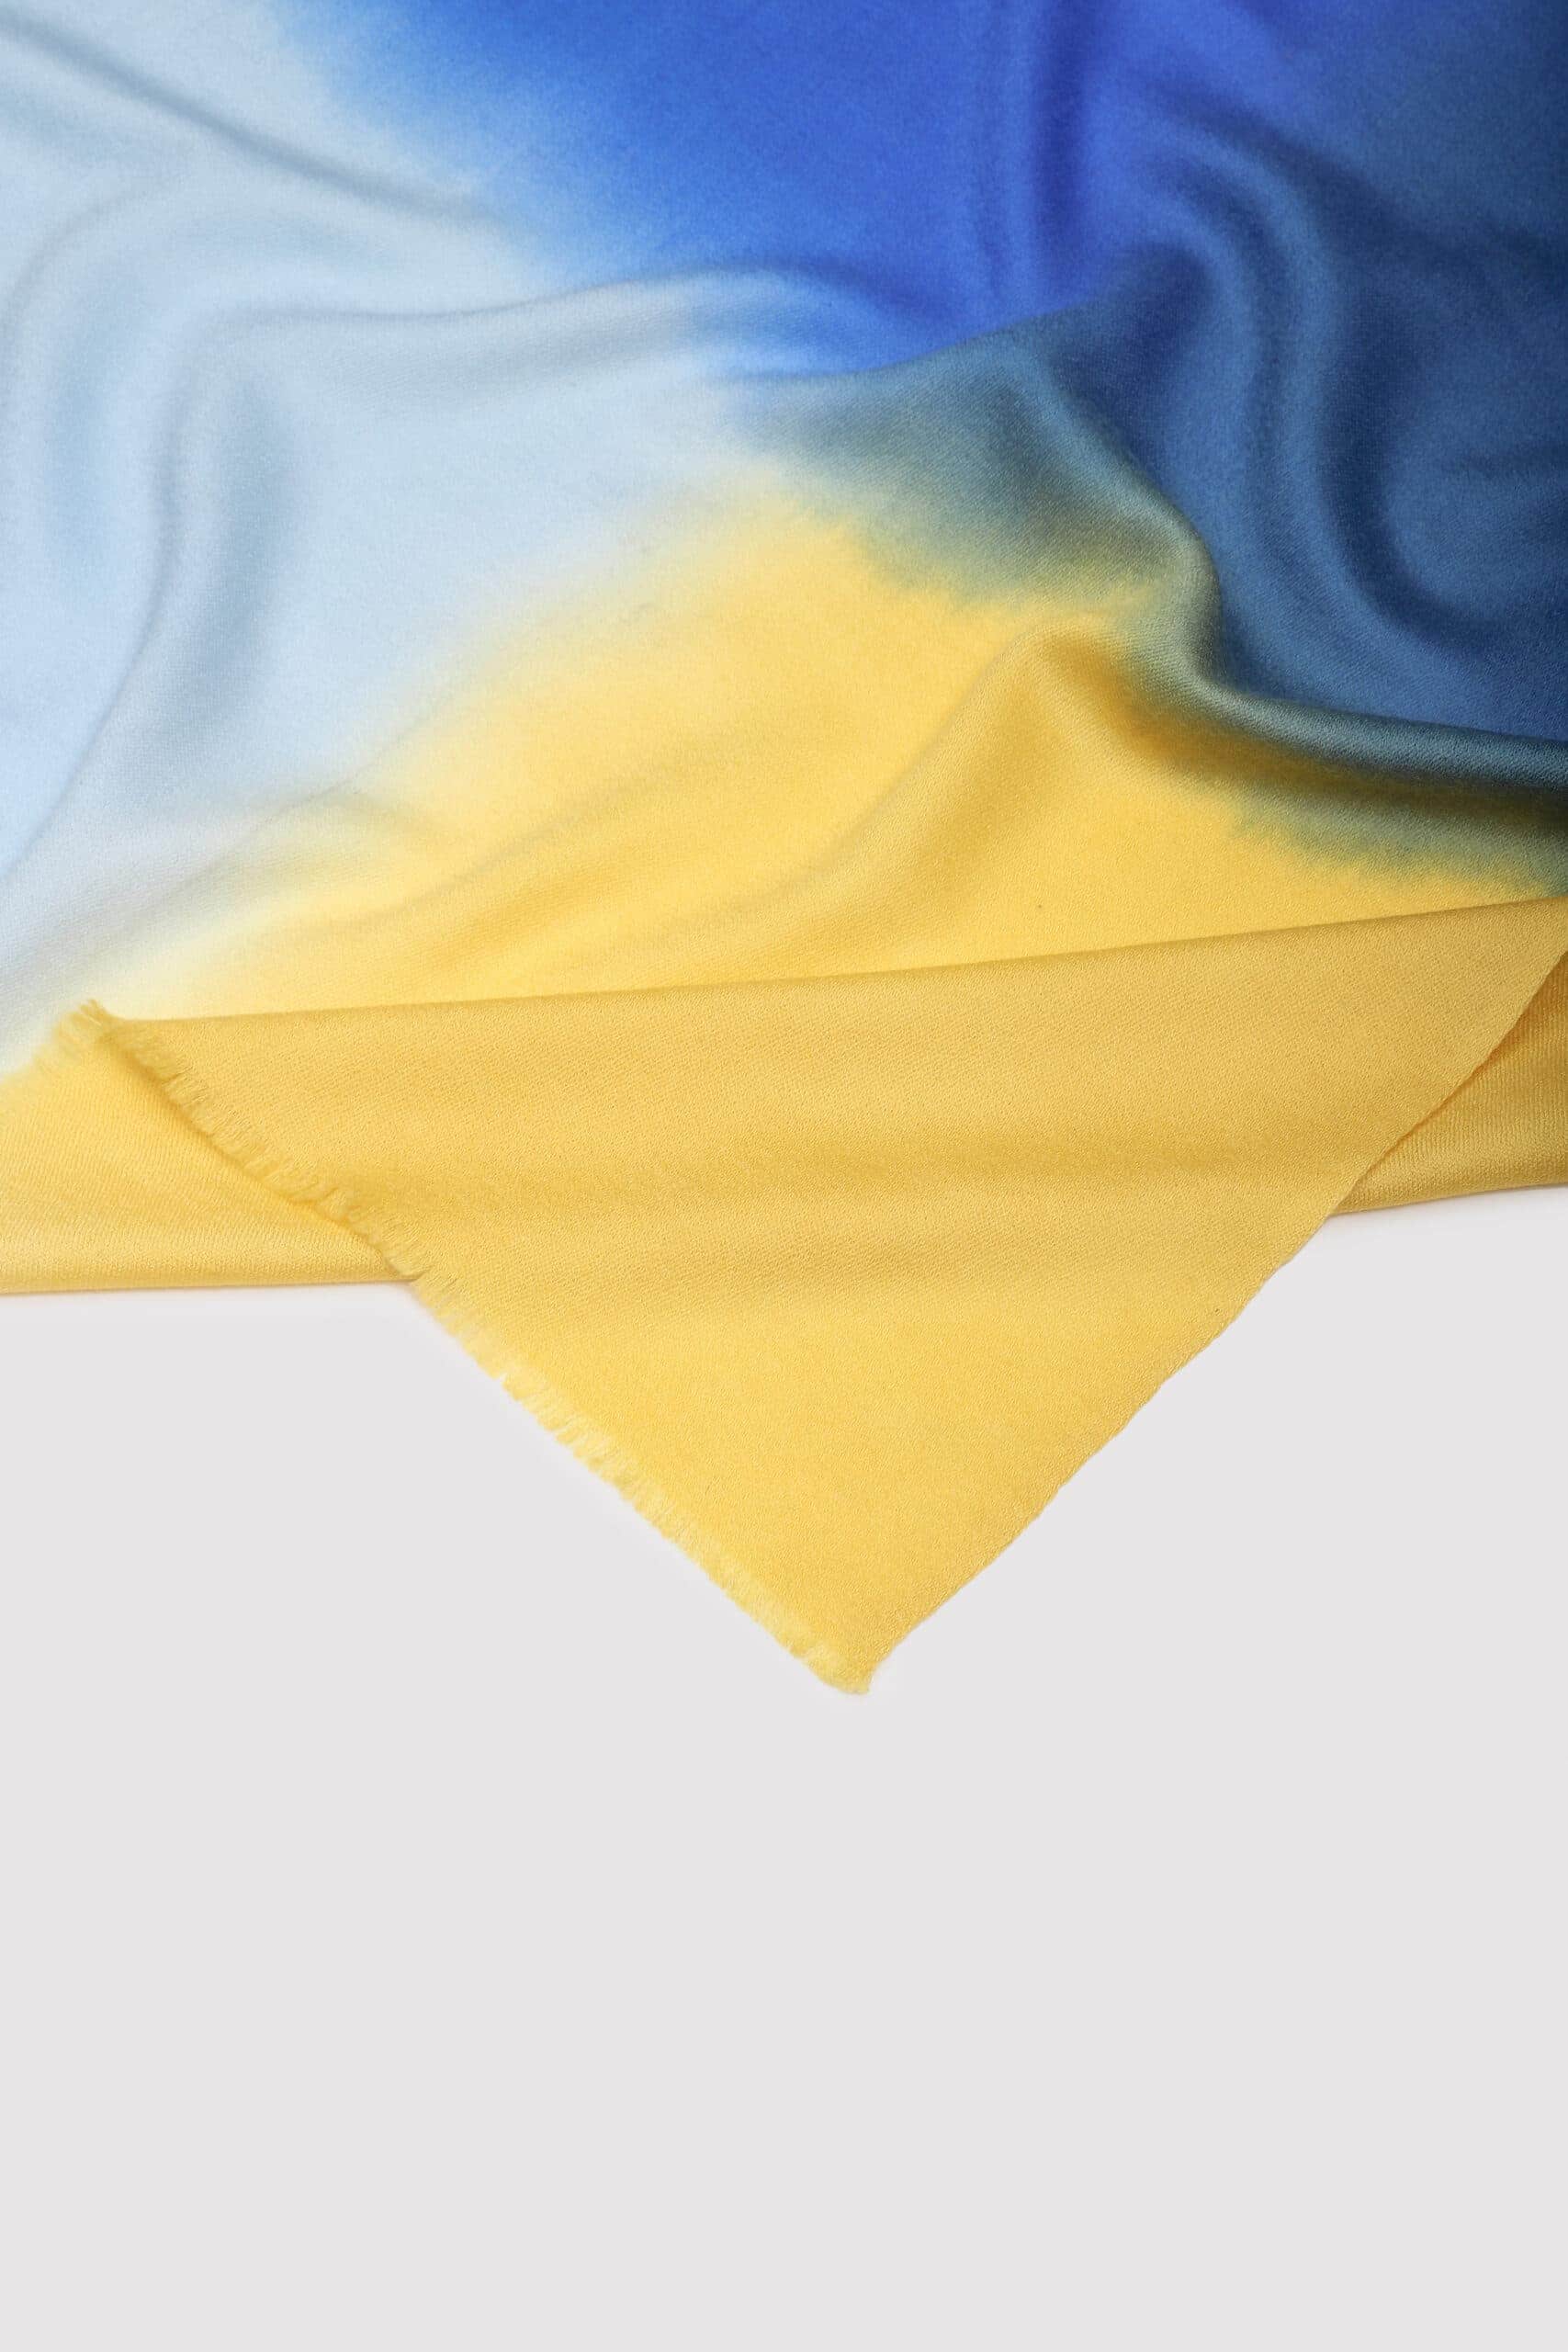 Four colored scarf on a white background - MeandK